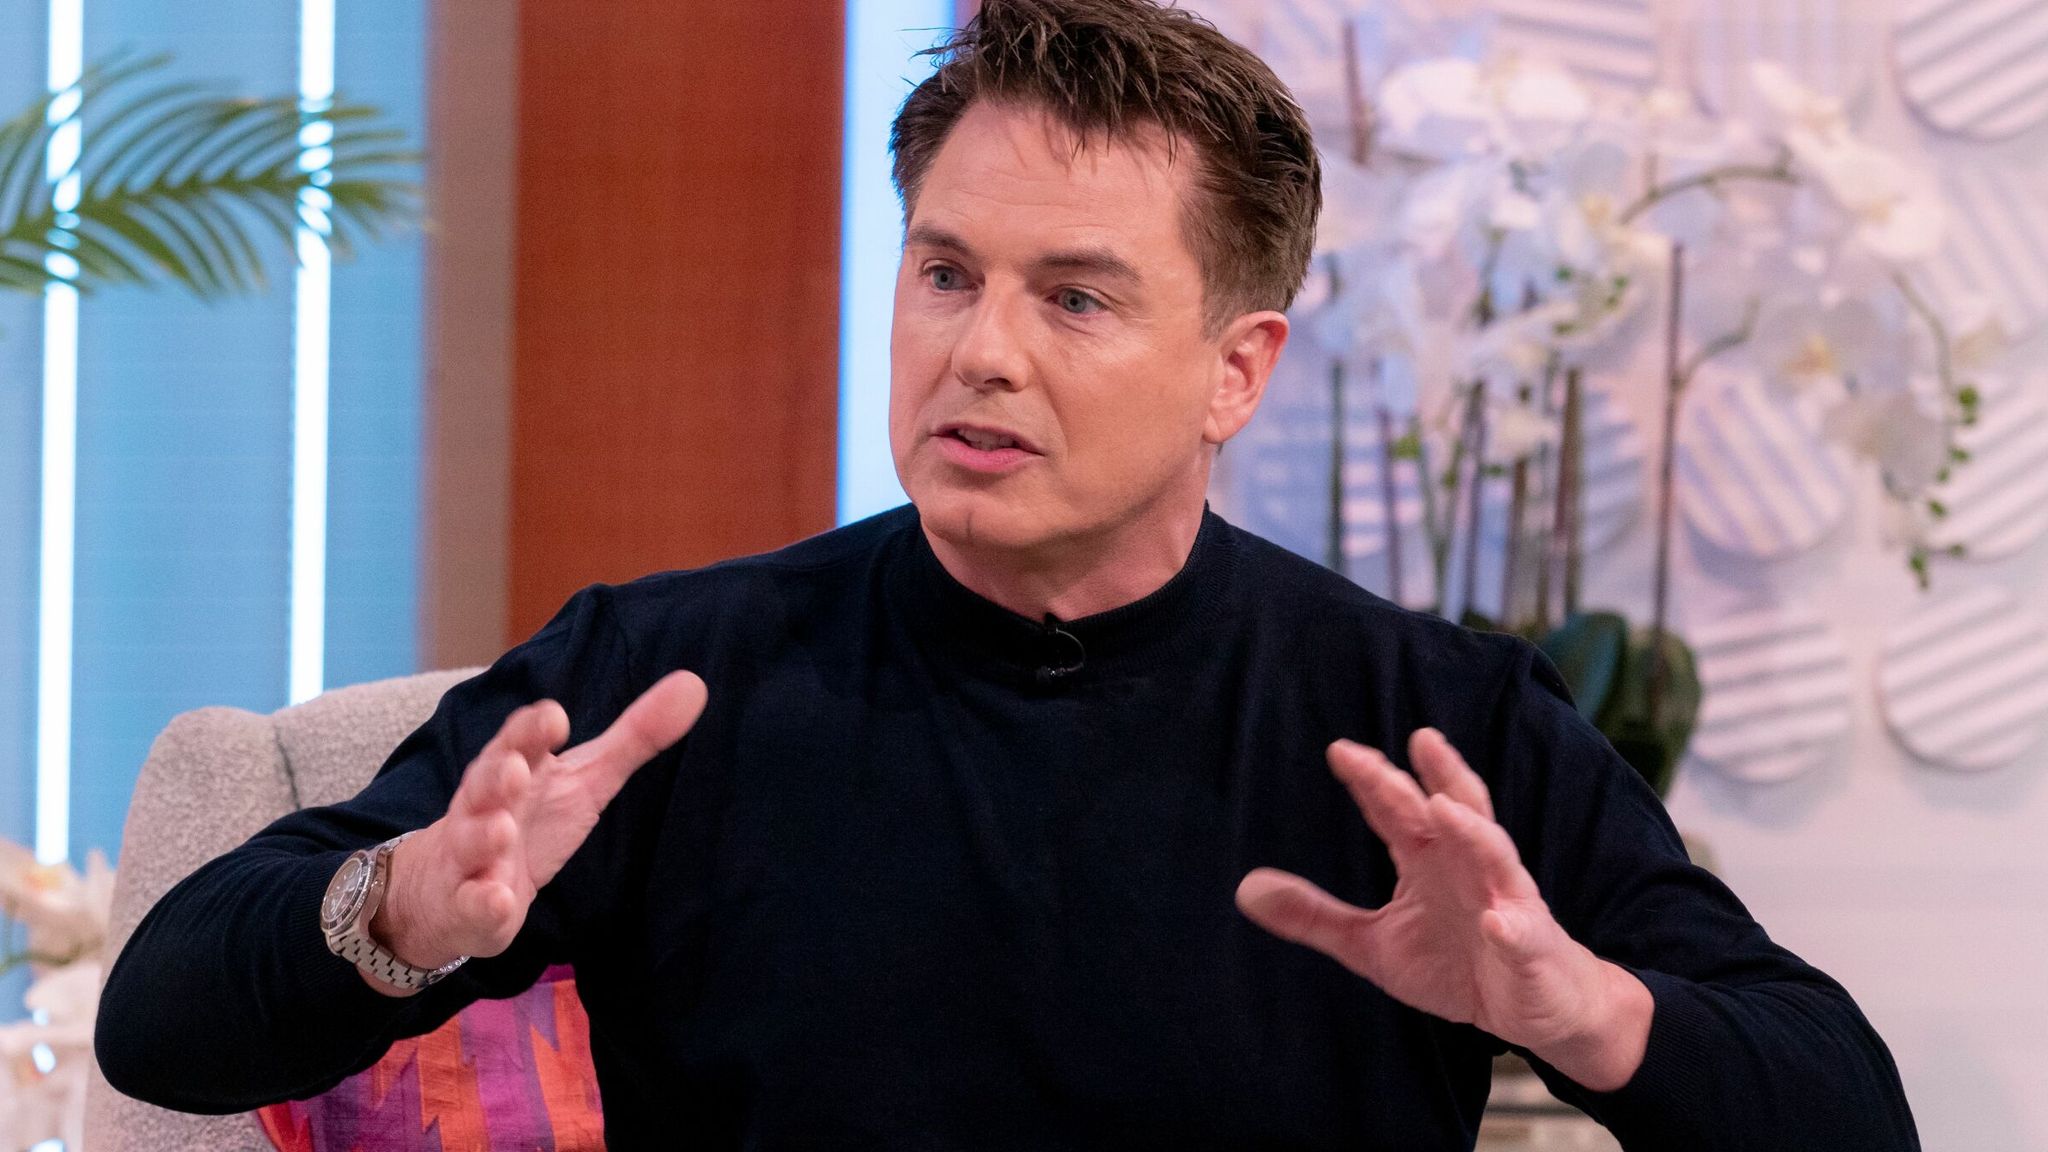 John Barrowman says Doctor Who flashing claims were exaggerated but admits it was 'silly behaviour' | Ents & Arts News | Sky News